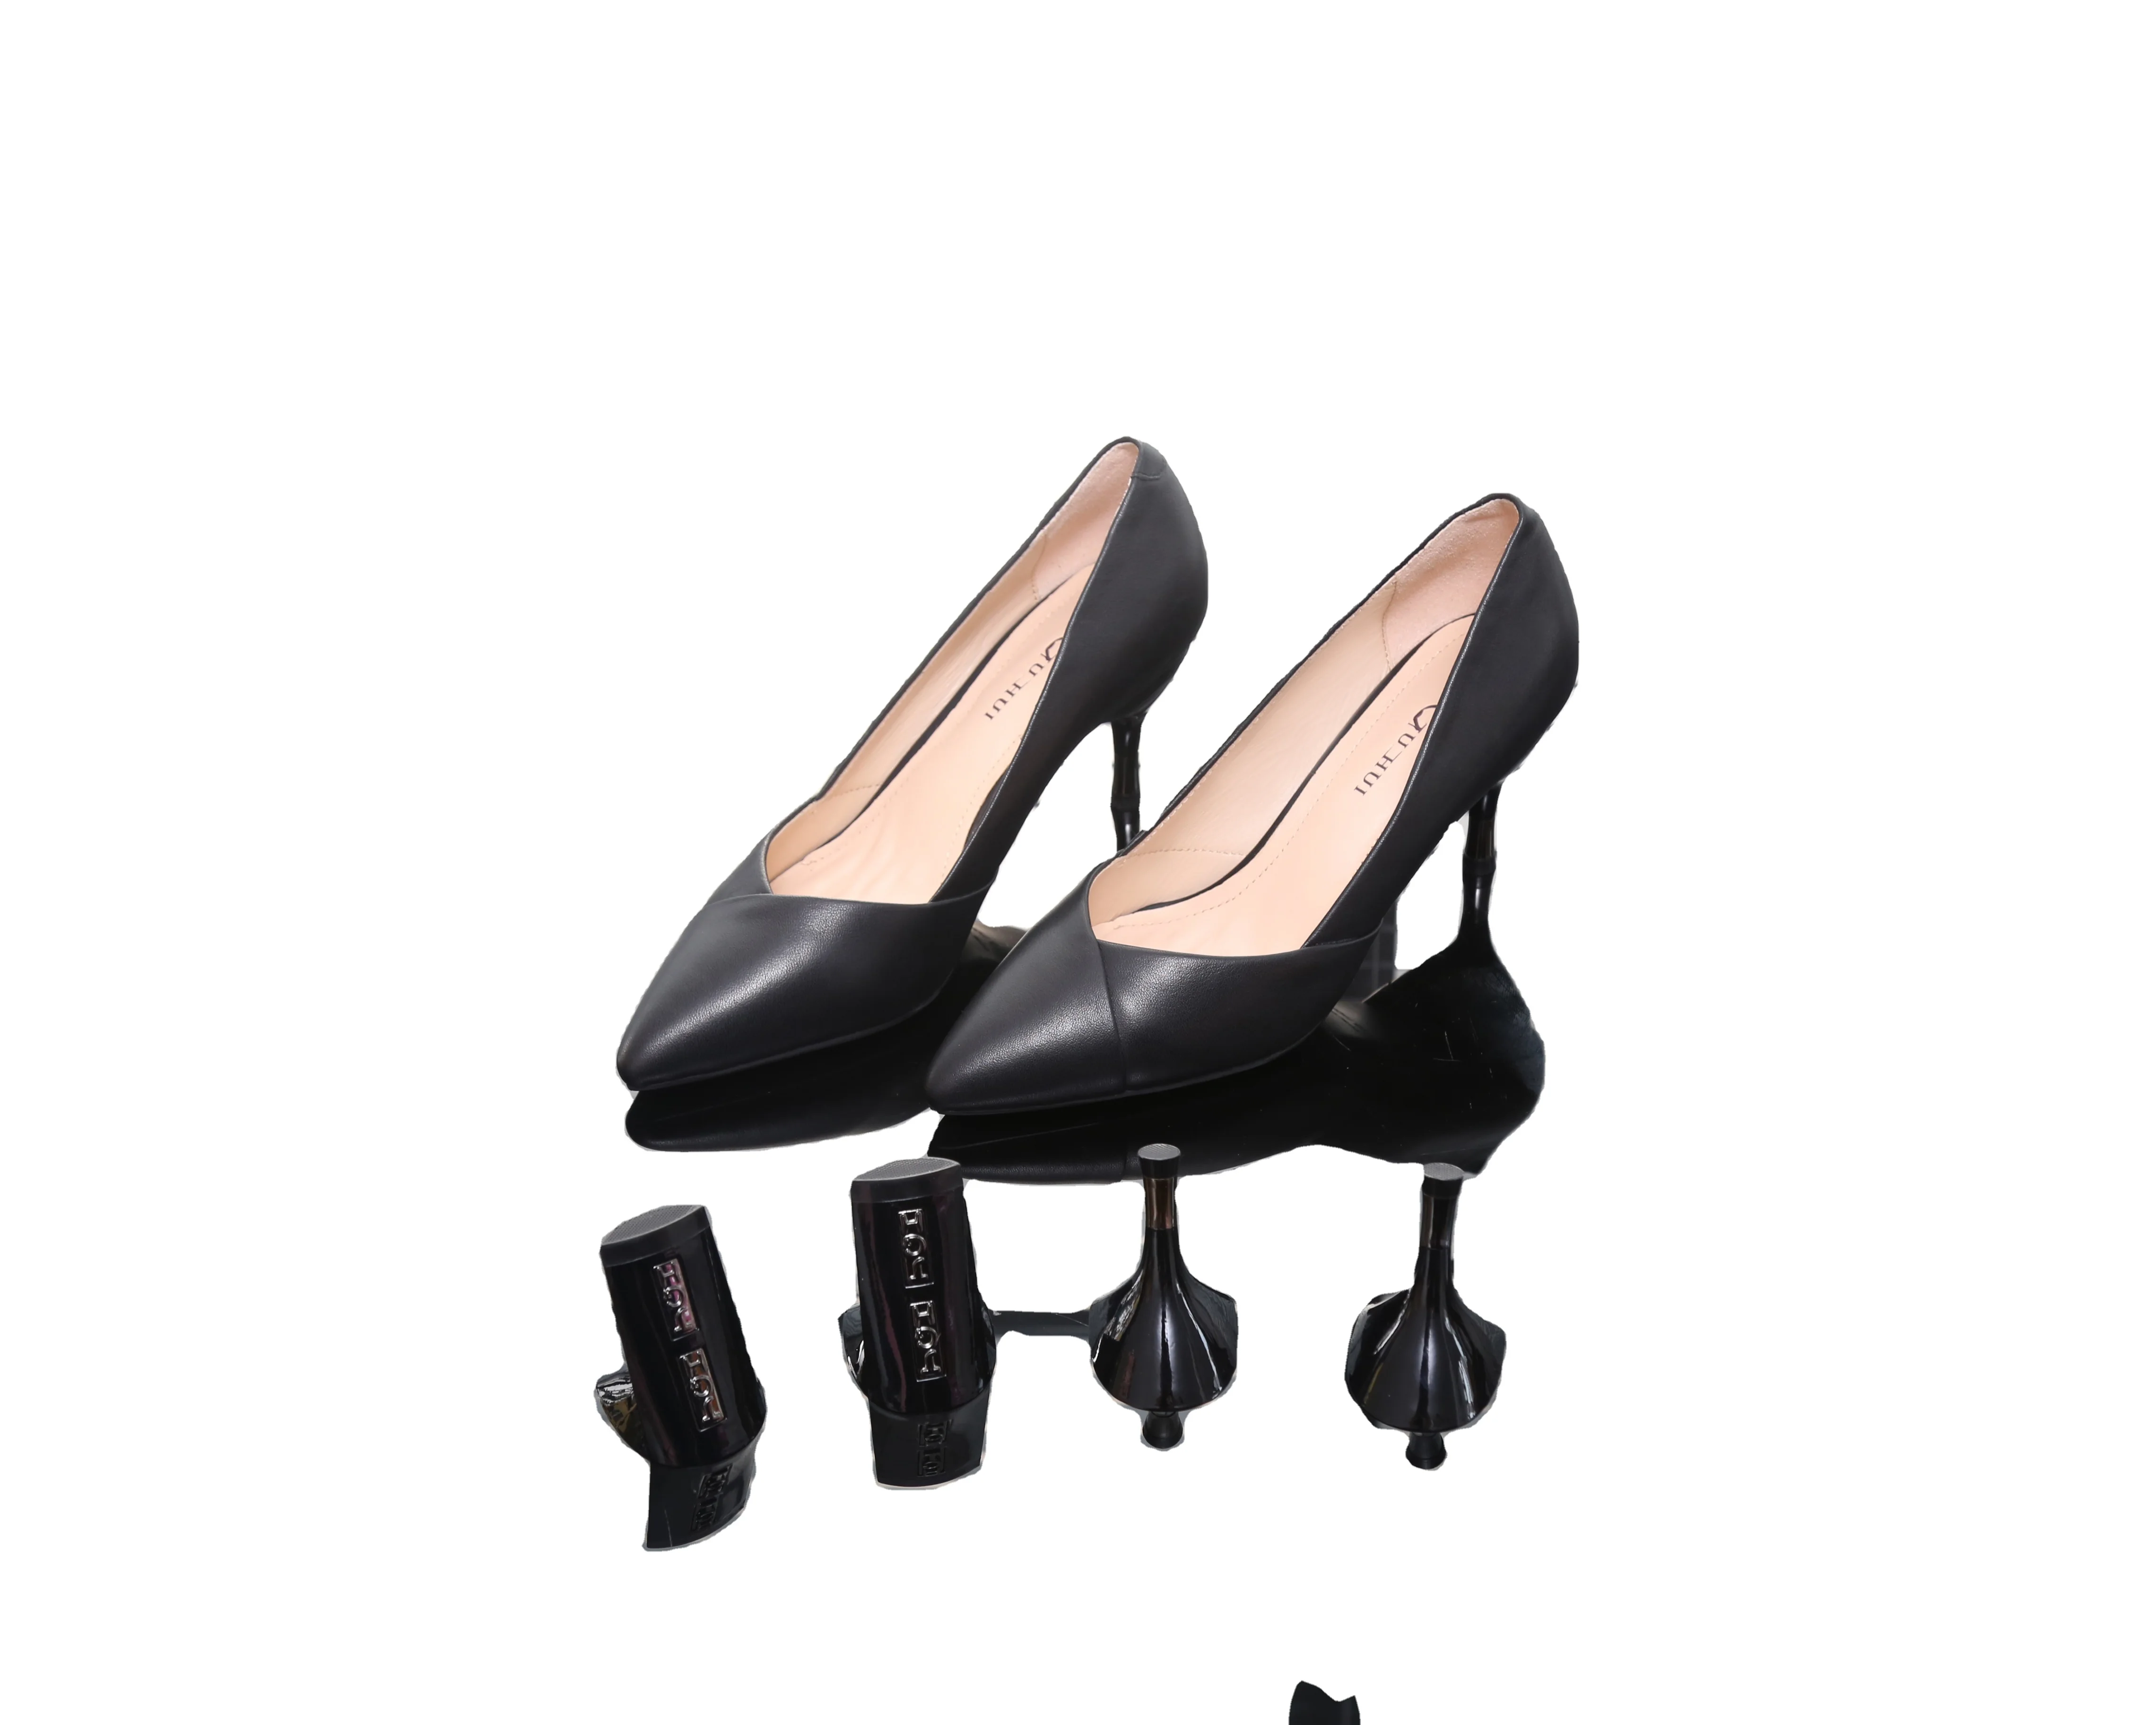 

2021 Fashion Leather Black Multi scene changeable high heel shoes removable heels shoes